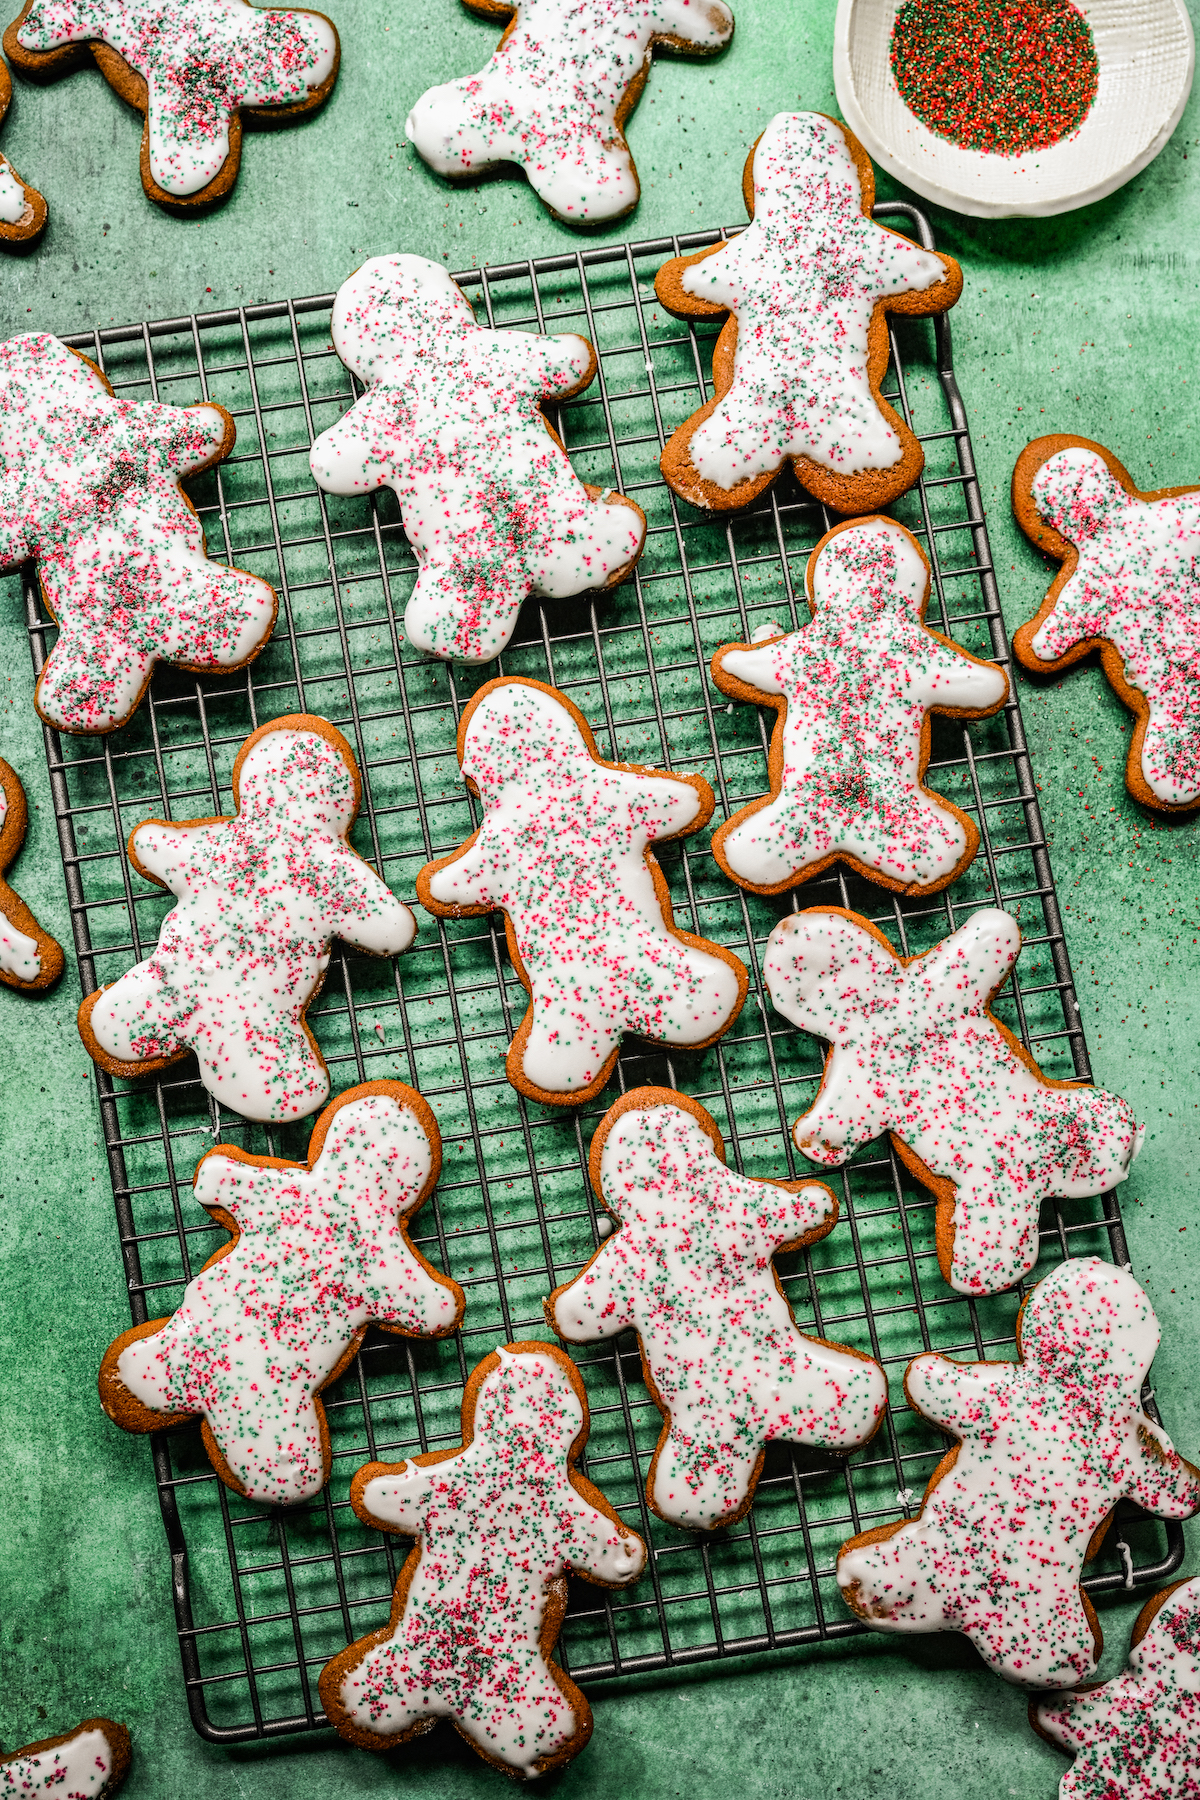 Iced gingerbread cookies on a wire rack, sprinkled with red and green sprinkles.